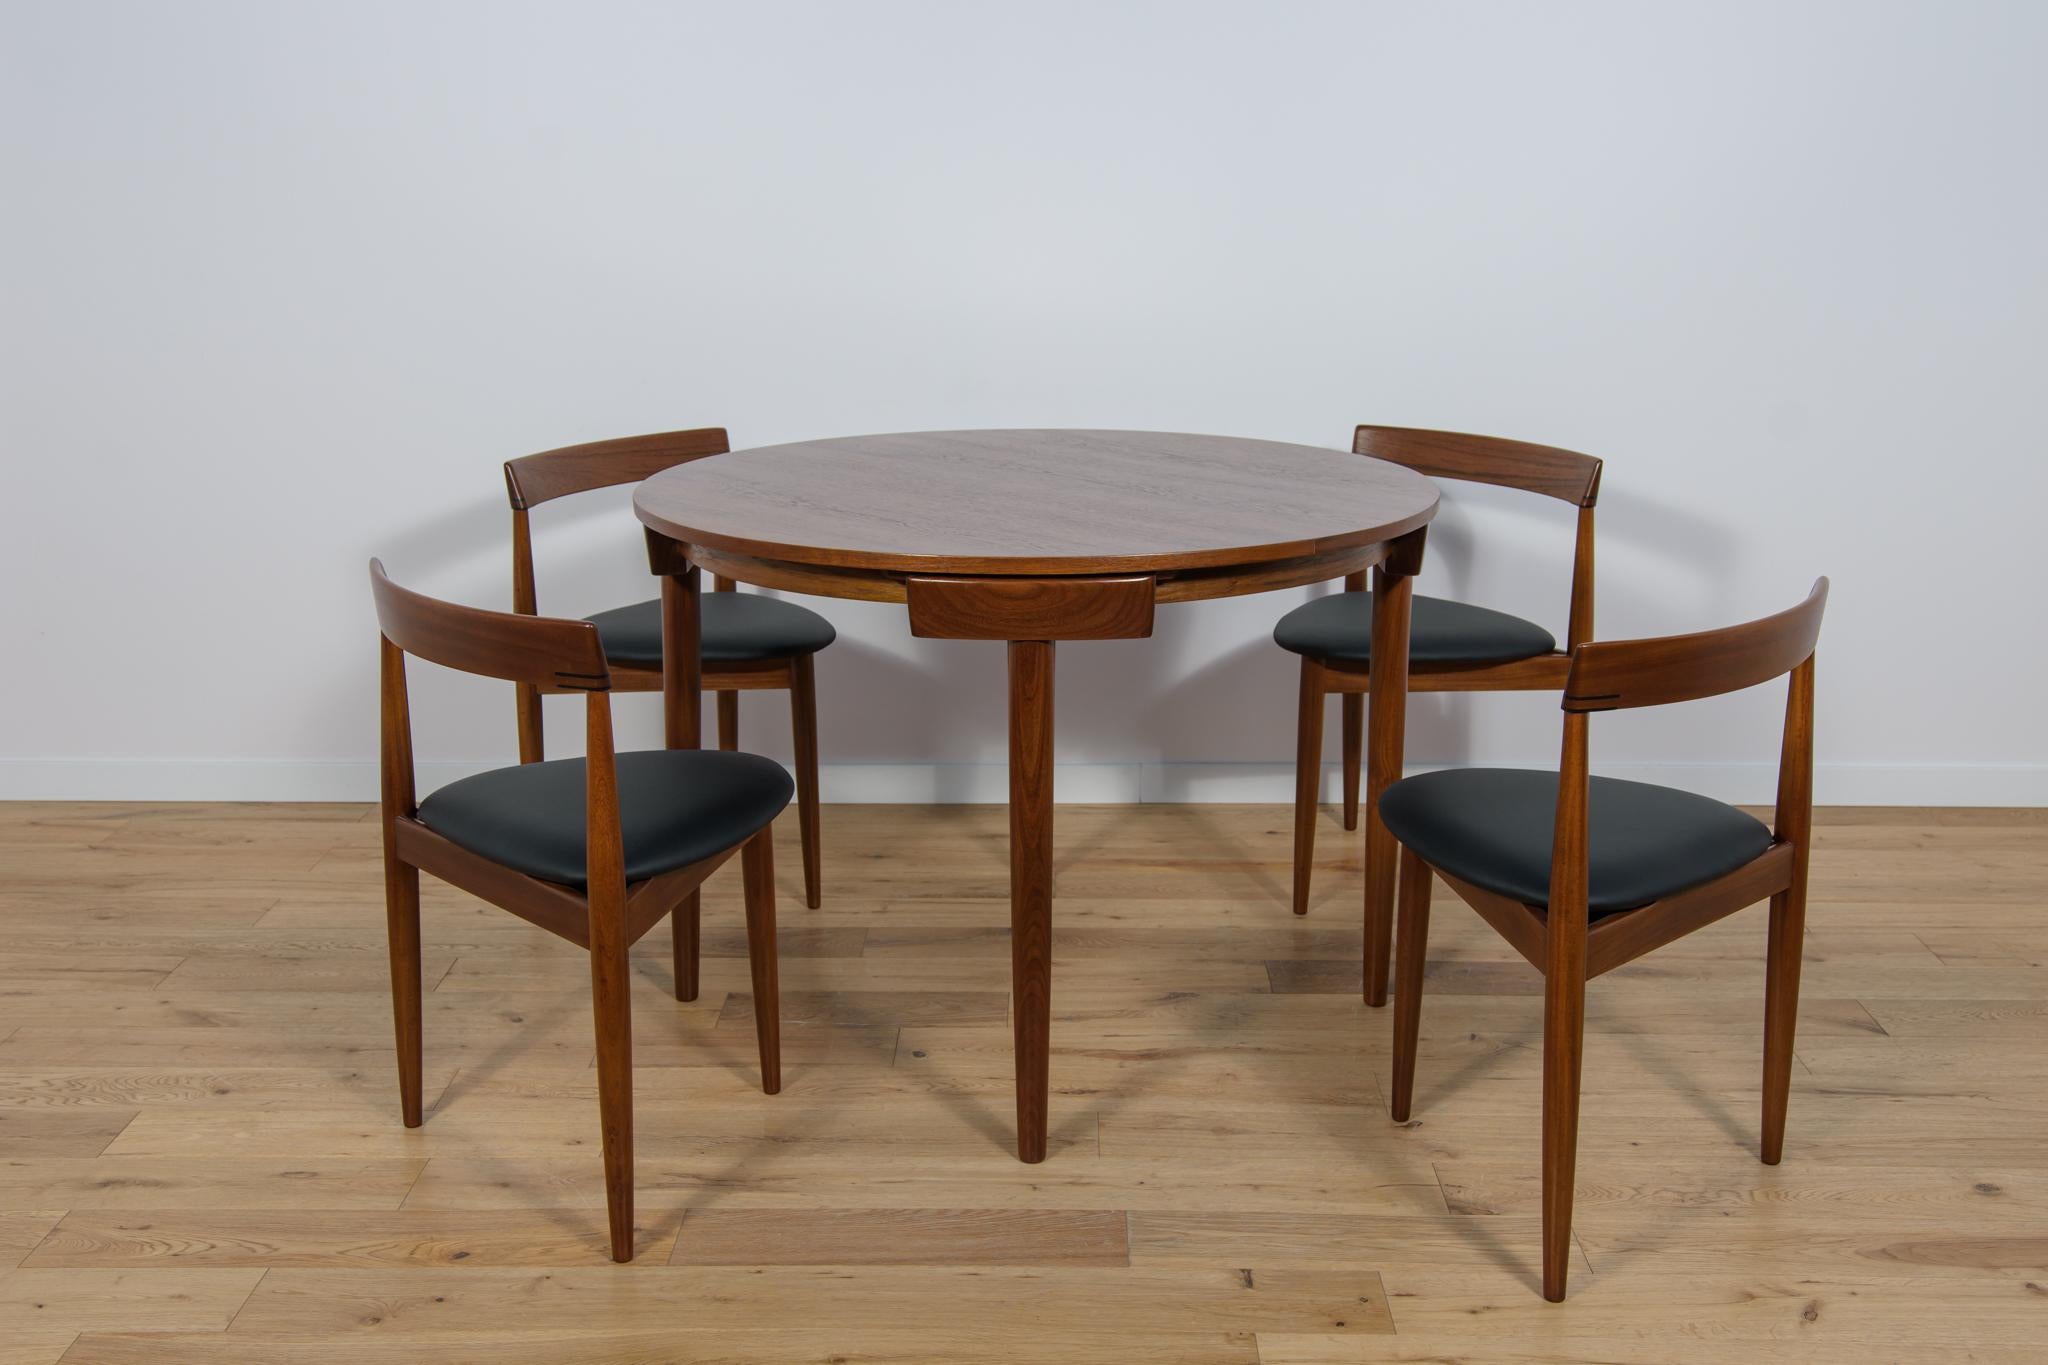 Manufactured by Frem Rojle in Denmark and designed by Hans Olsen. The chairs feature a teak frame with a triangular seat upholstered in black new natural leather. The woods items have been cleaned from the old surface and painted oak stain and